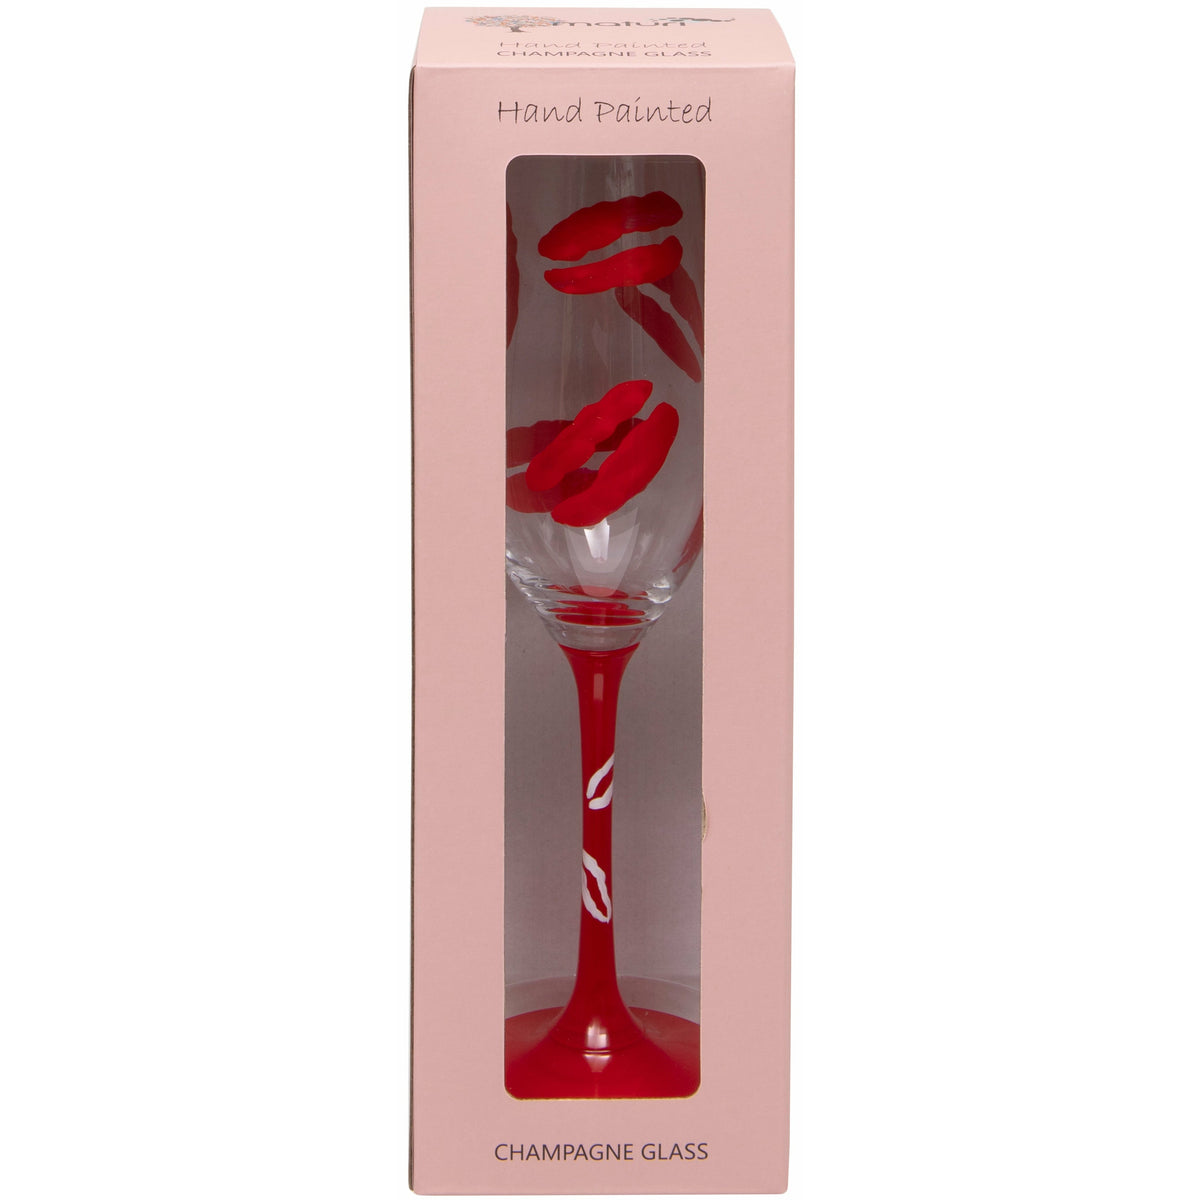 Hand Painted Kiss Champagne Flute in Box